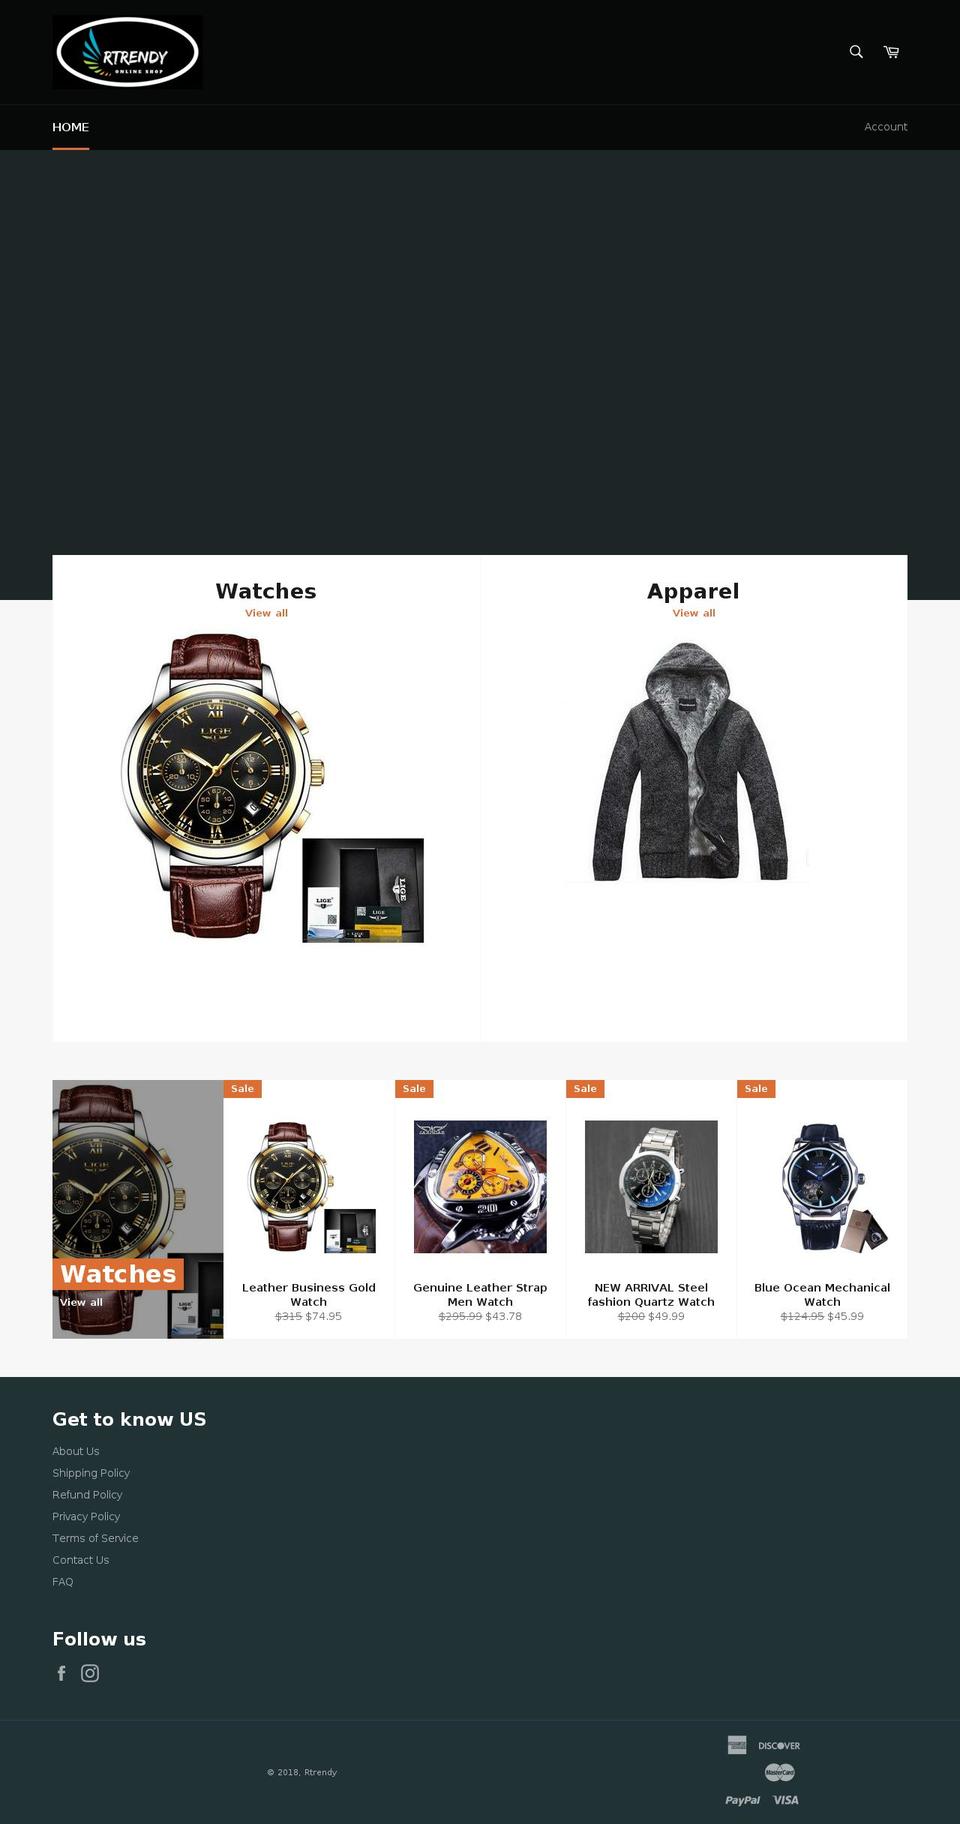 Copy of venture Shopify theme site example rtrendy.com